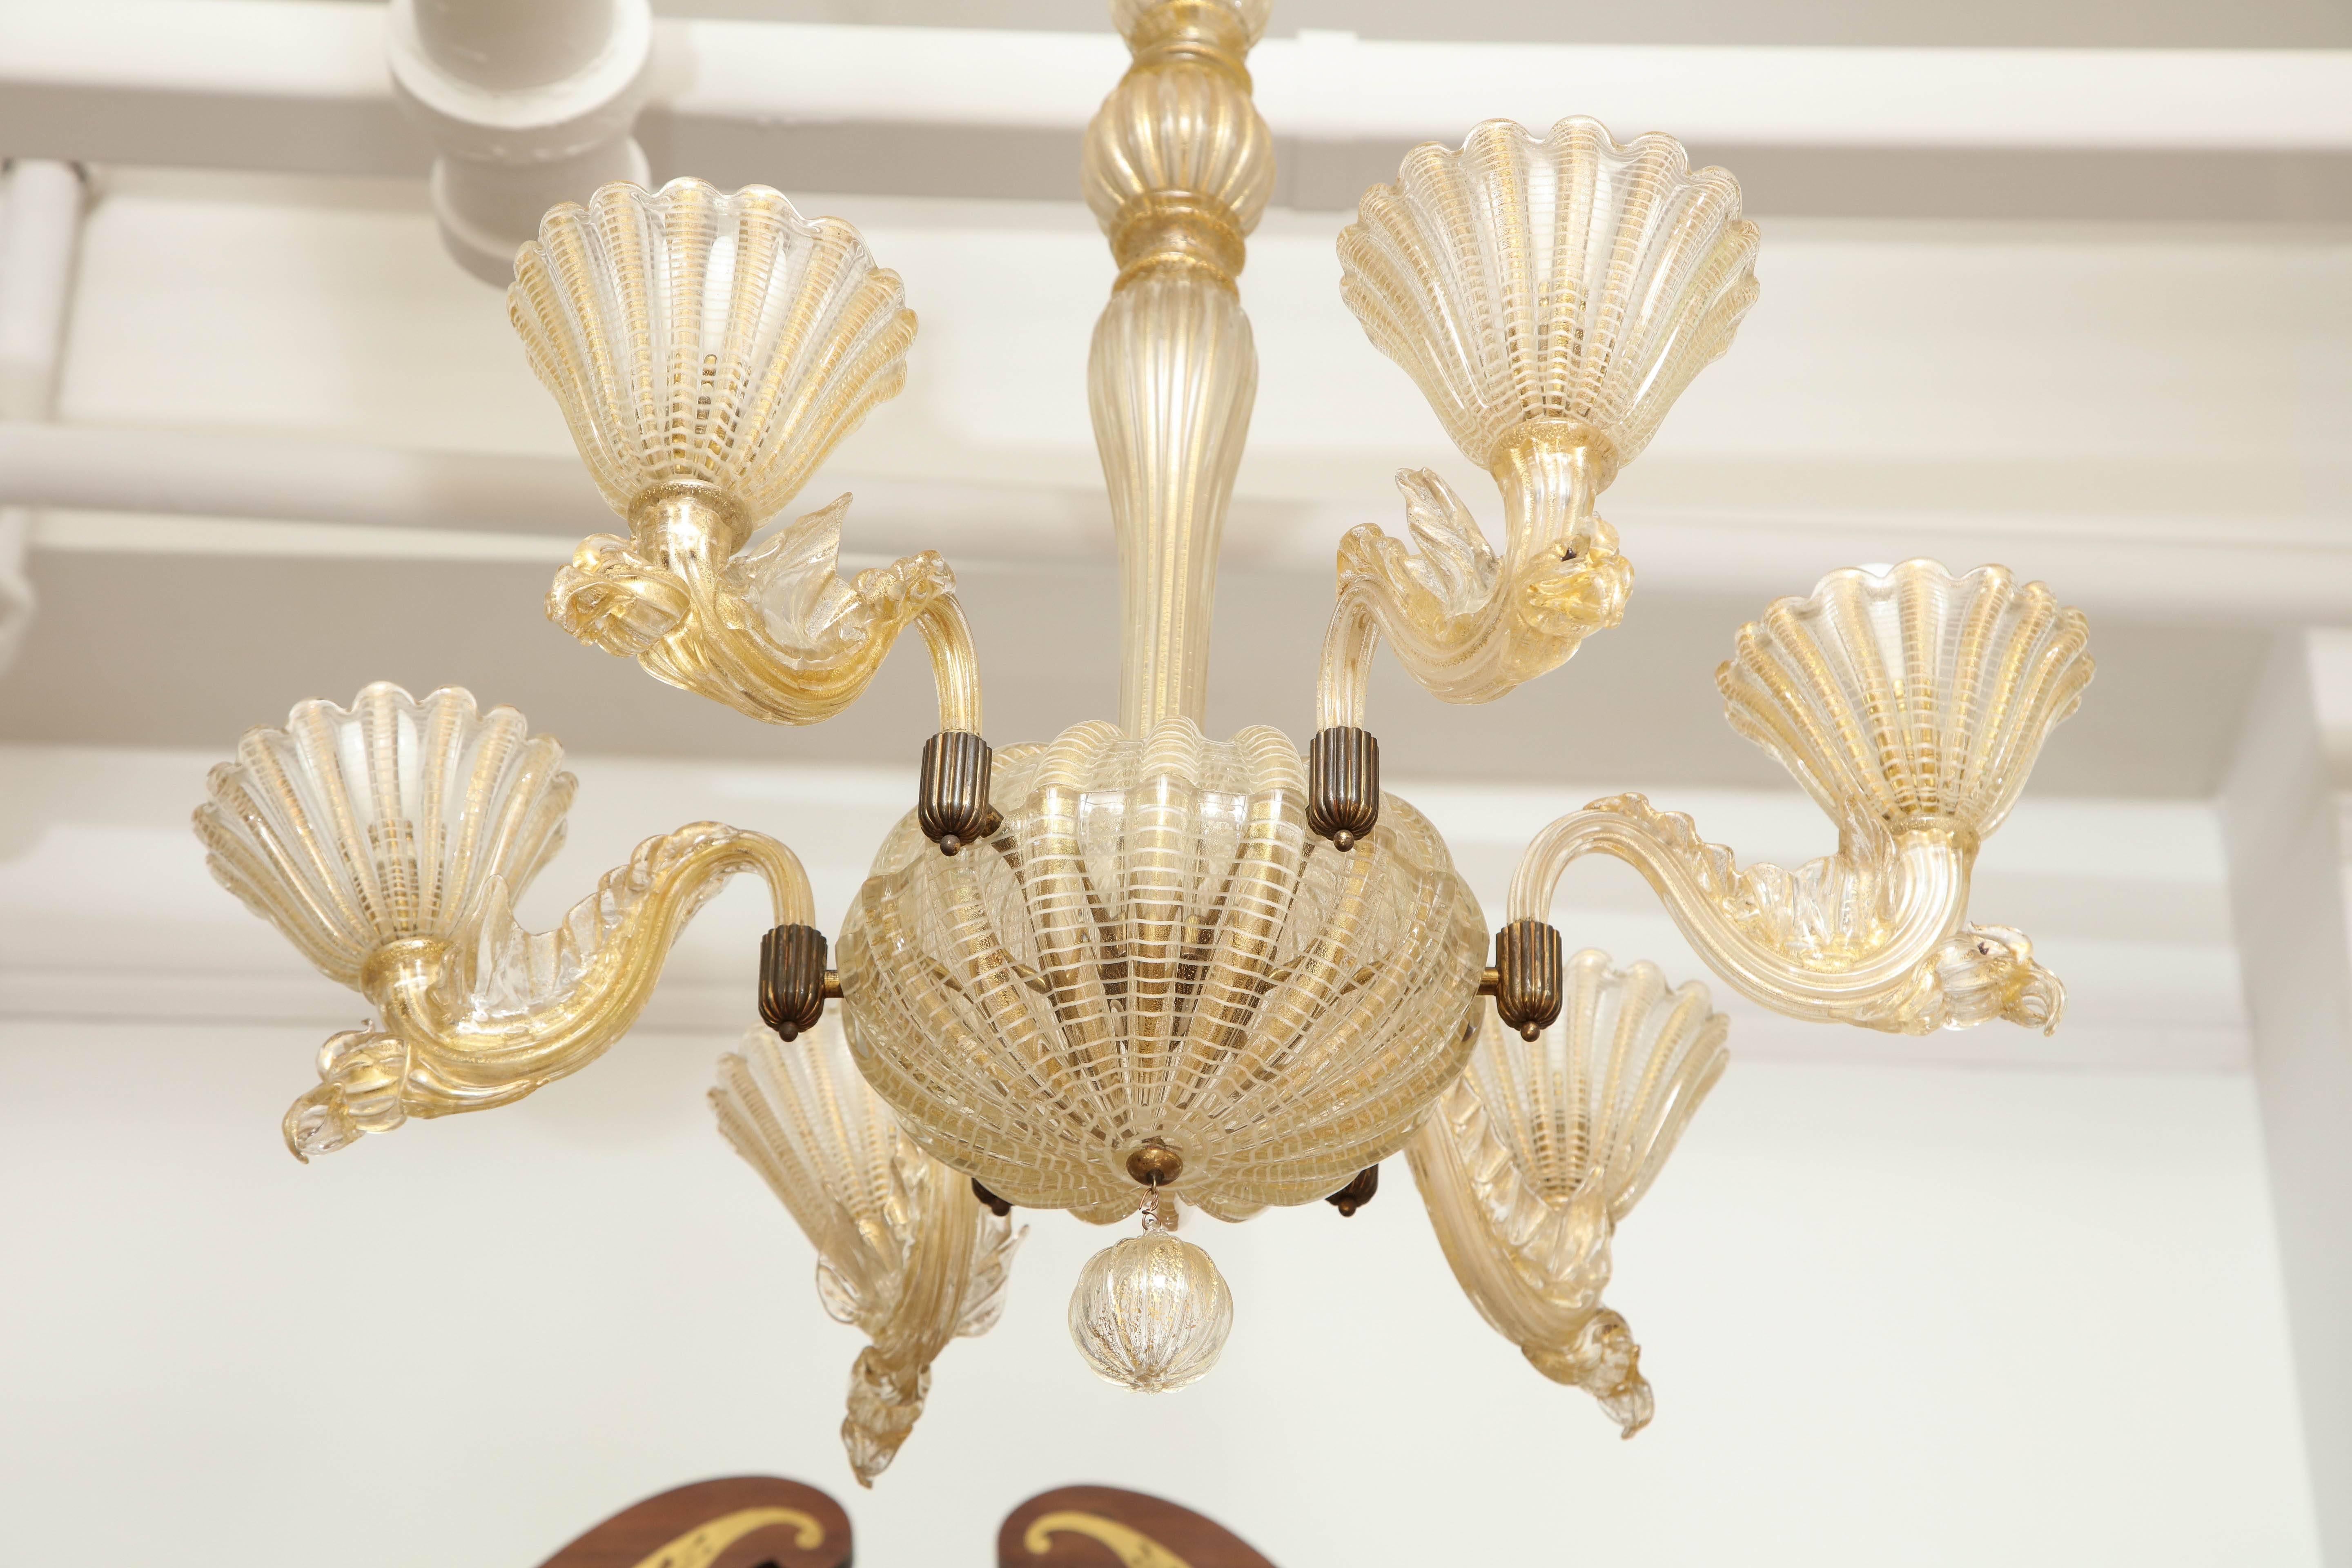 Art Deco Barovier & Toso Chandelier Made in Venice, 1935 For Sale